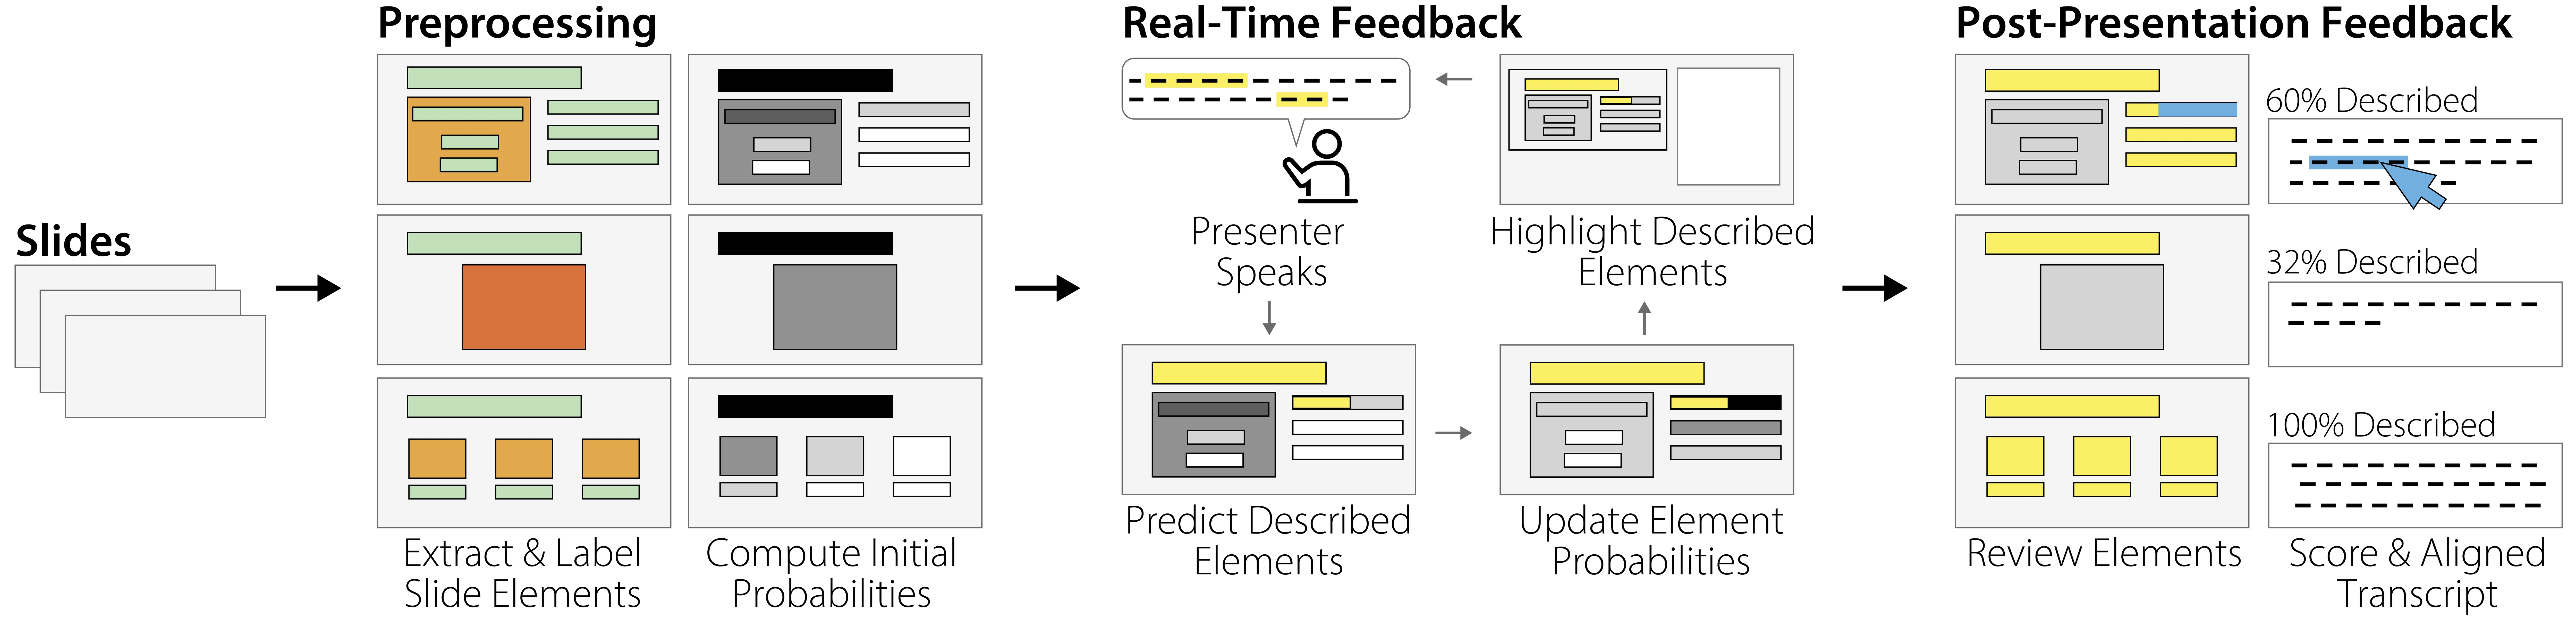 A diagram of Presentation A11y's workflow. A presenter's slides enter Preprocessing, where slide elements like titles, images, body text are analyzed and labelled by the system. The system also calculates relative probabilities that each element will be spoken aloud. When the presenter is giving the talk, Presentation A11y provides Real-Time Feedback, such that spoken words are analyzed to help predict upcoming elements by updating the probability map. Slide elements determined to have been referenced will then be highlighted in real time. After the presentation Presentation A11y provides Post-Presentation Feedback, where slides are shown with slide elements highlighted that the system determines has been referenced in the talk. A transcript of the talk is shown alongside the slides, with the text segmented and displayed next to the slide on which it was determined to have been spoken. Each slide receives a percentage-based score indicating how well slide elements on each slide received verbal coverage. In this figure, 3 percentage scores are presented in the post-presentation feedback interface for each of three slides, which respectively are 60%, 32 % and 100 %. The users can hover their mouse on non-fully described element descriptions to highlight the corresponding elements on slide.